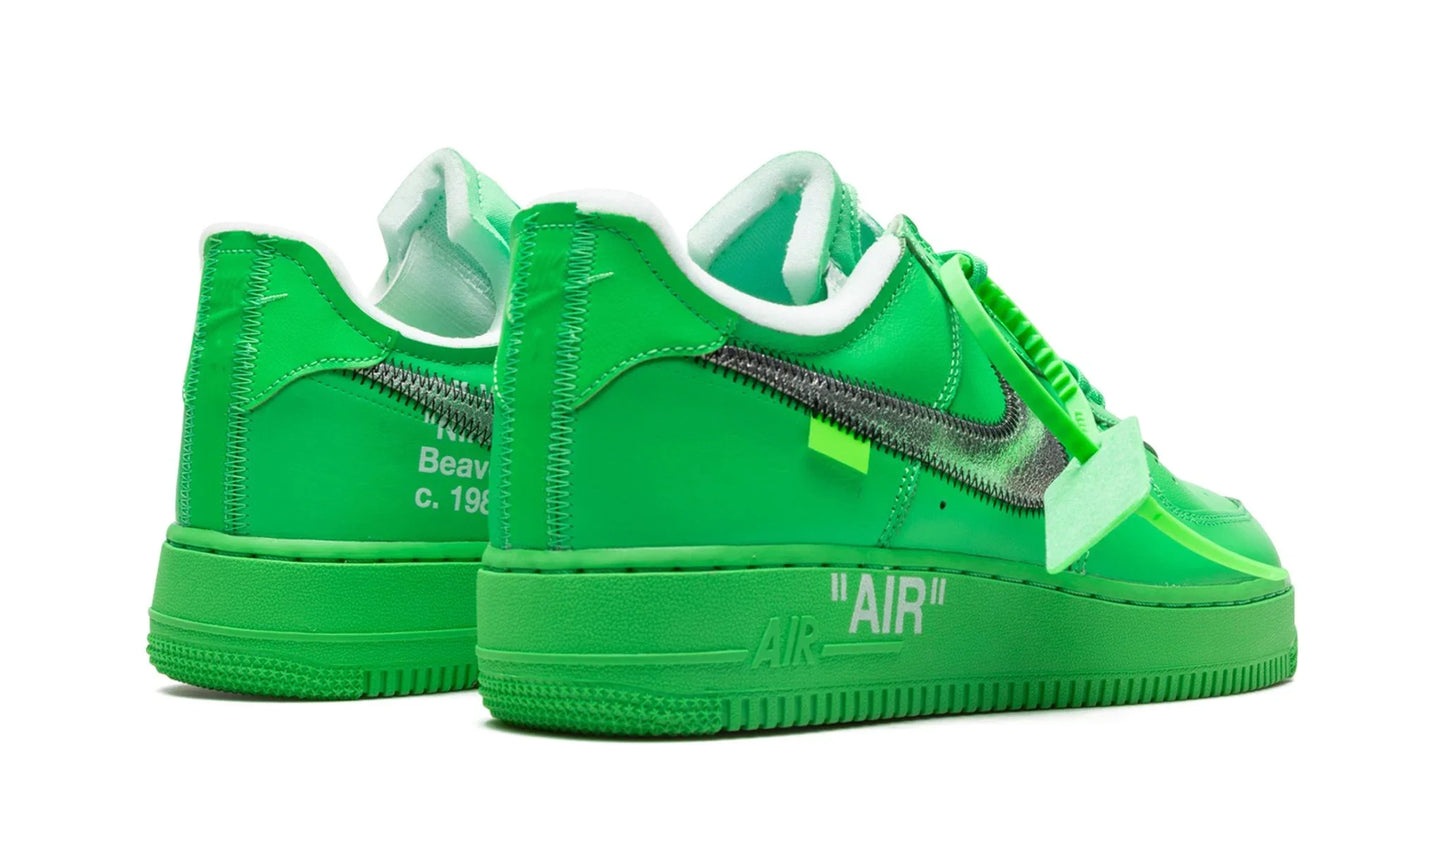 NIKE X OFF-WHITE AIR FORCE 1 LOW "Off-White - Brooklyn"